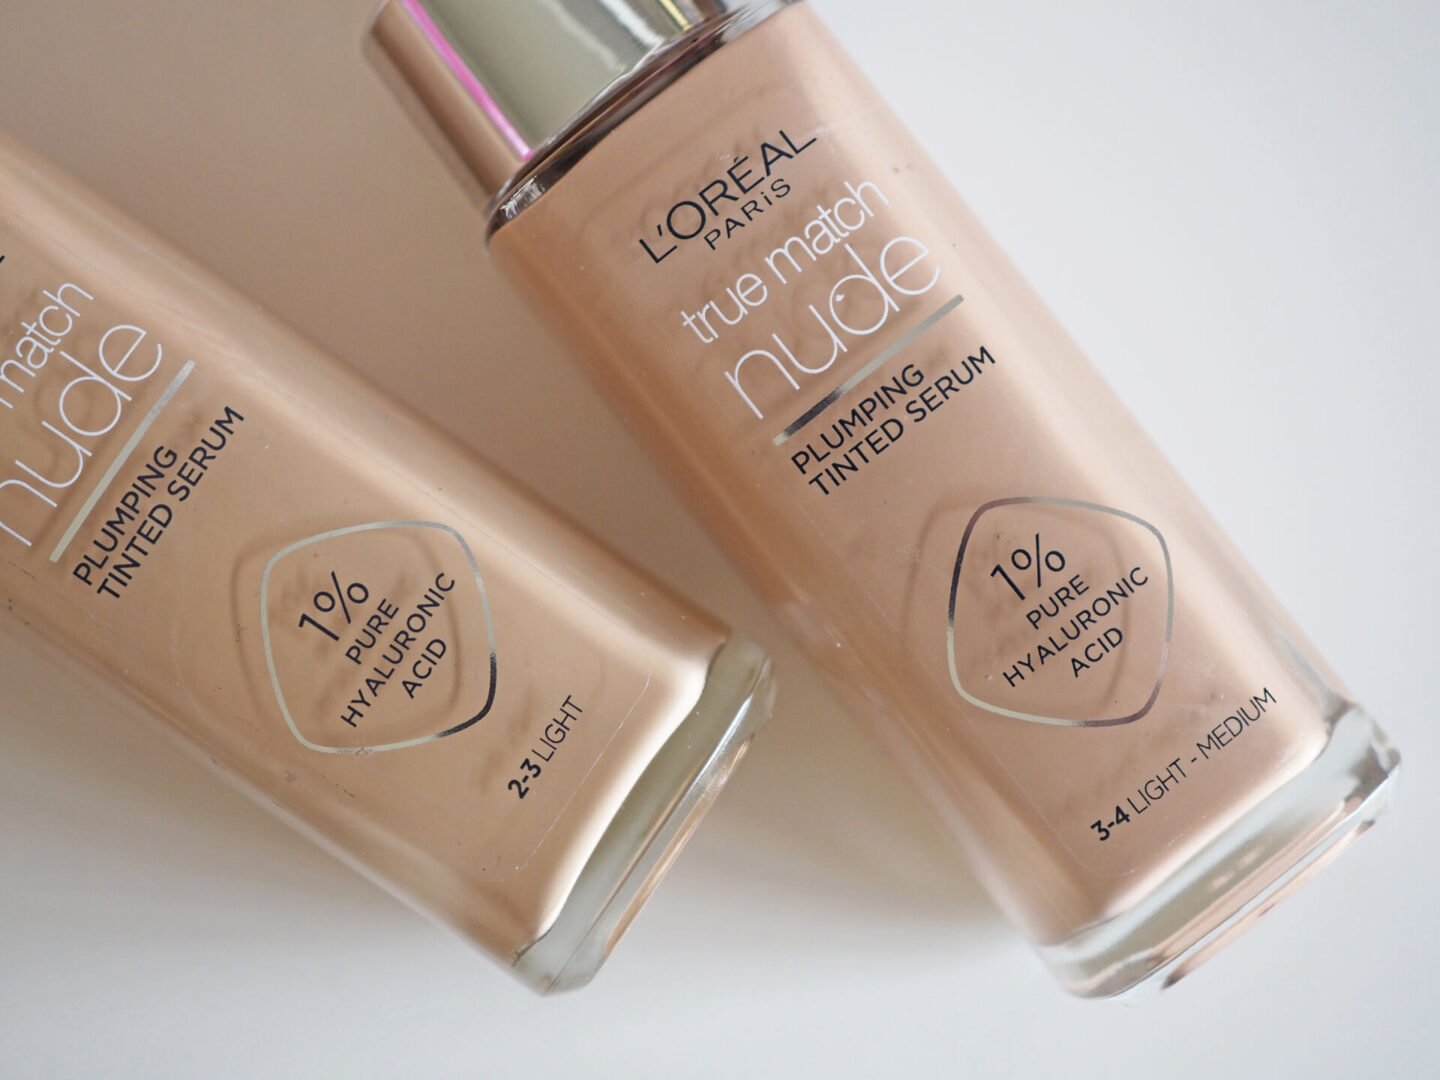 L'Oreal True Match Plumping Tinted Serum review